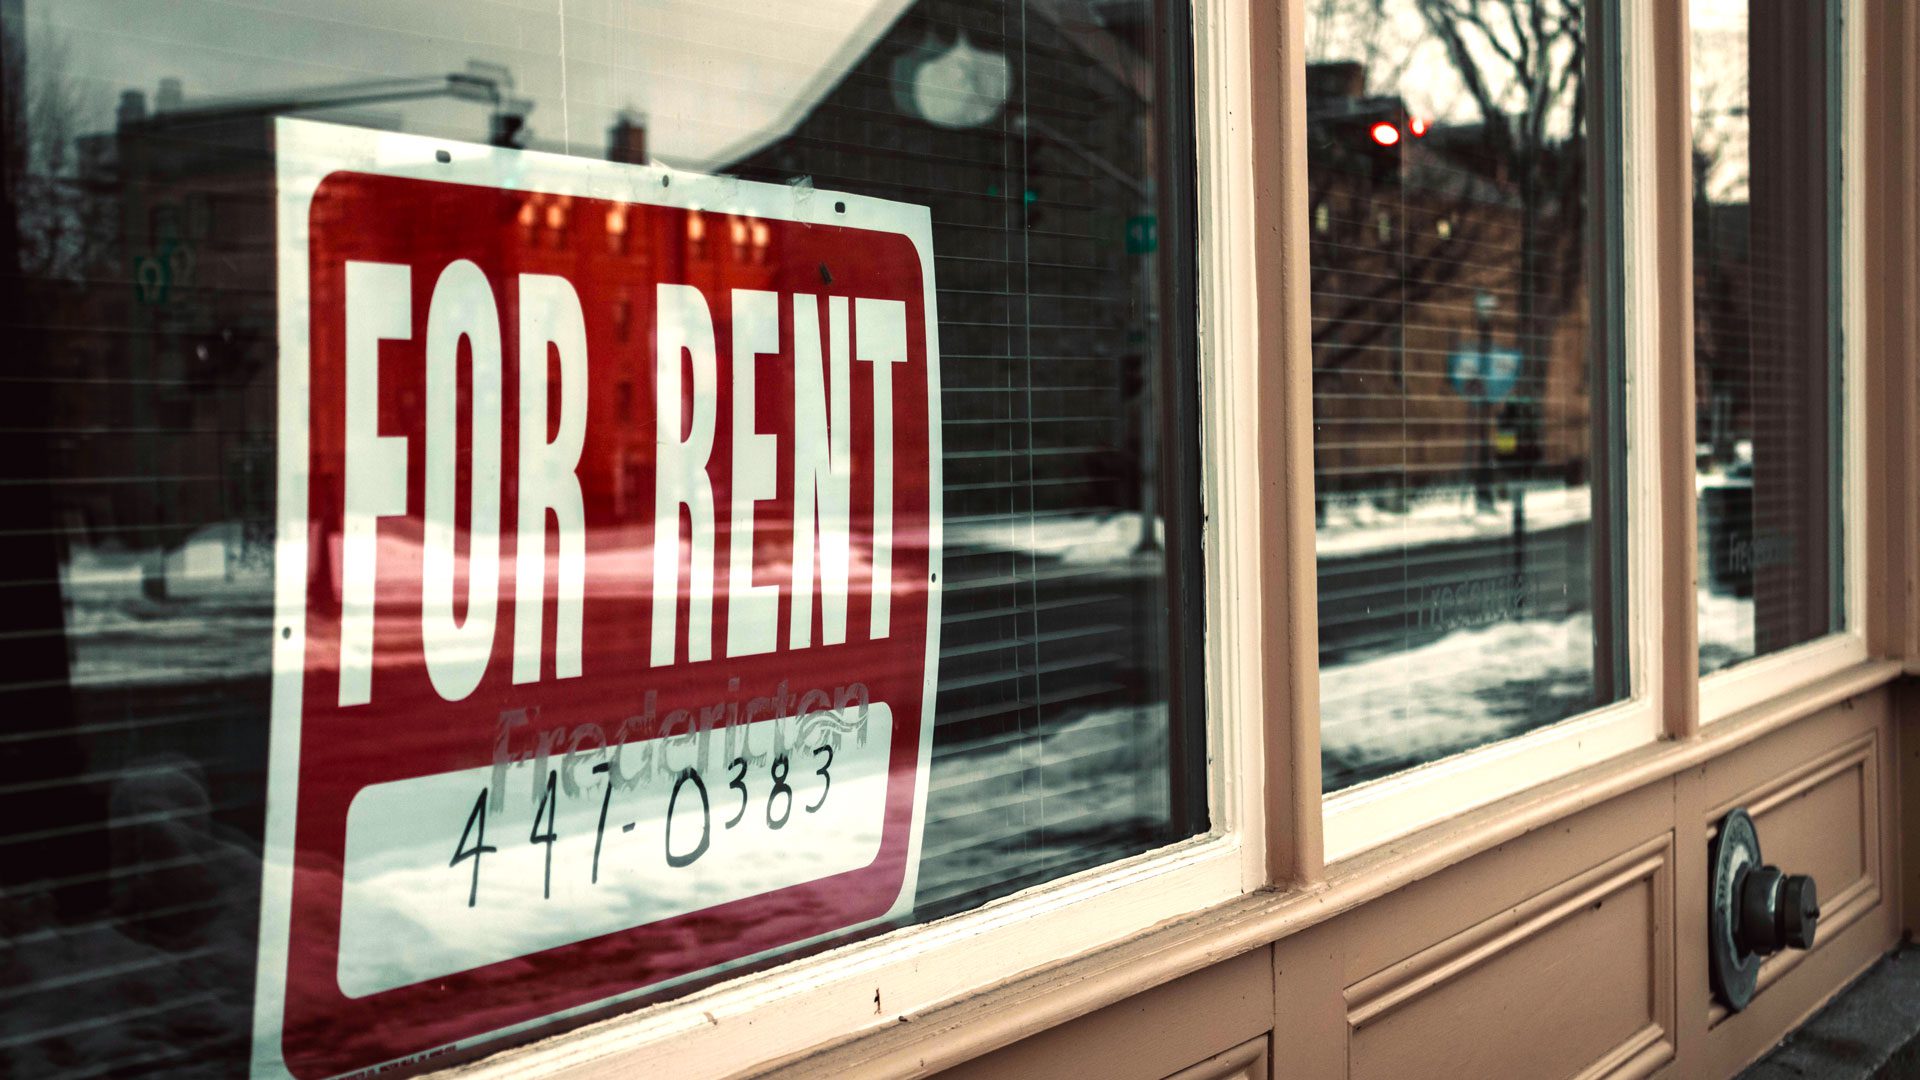 stock photo of a for rent sign in a window